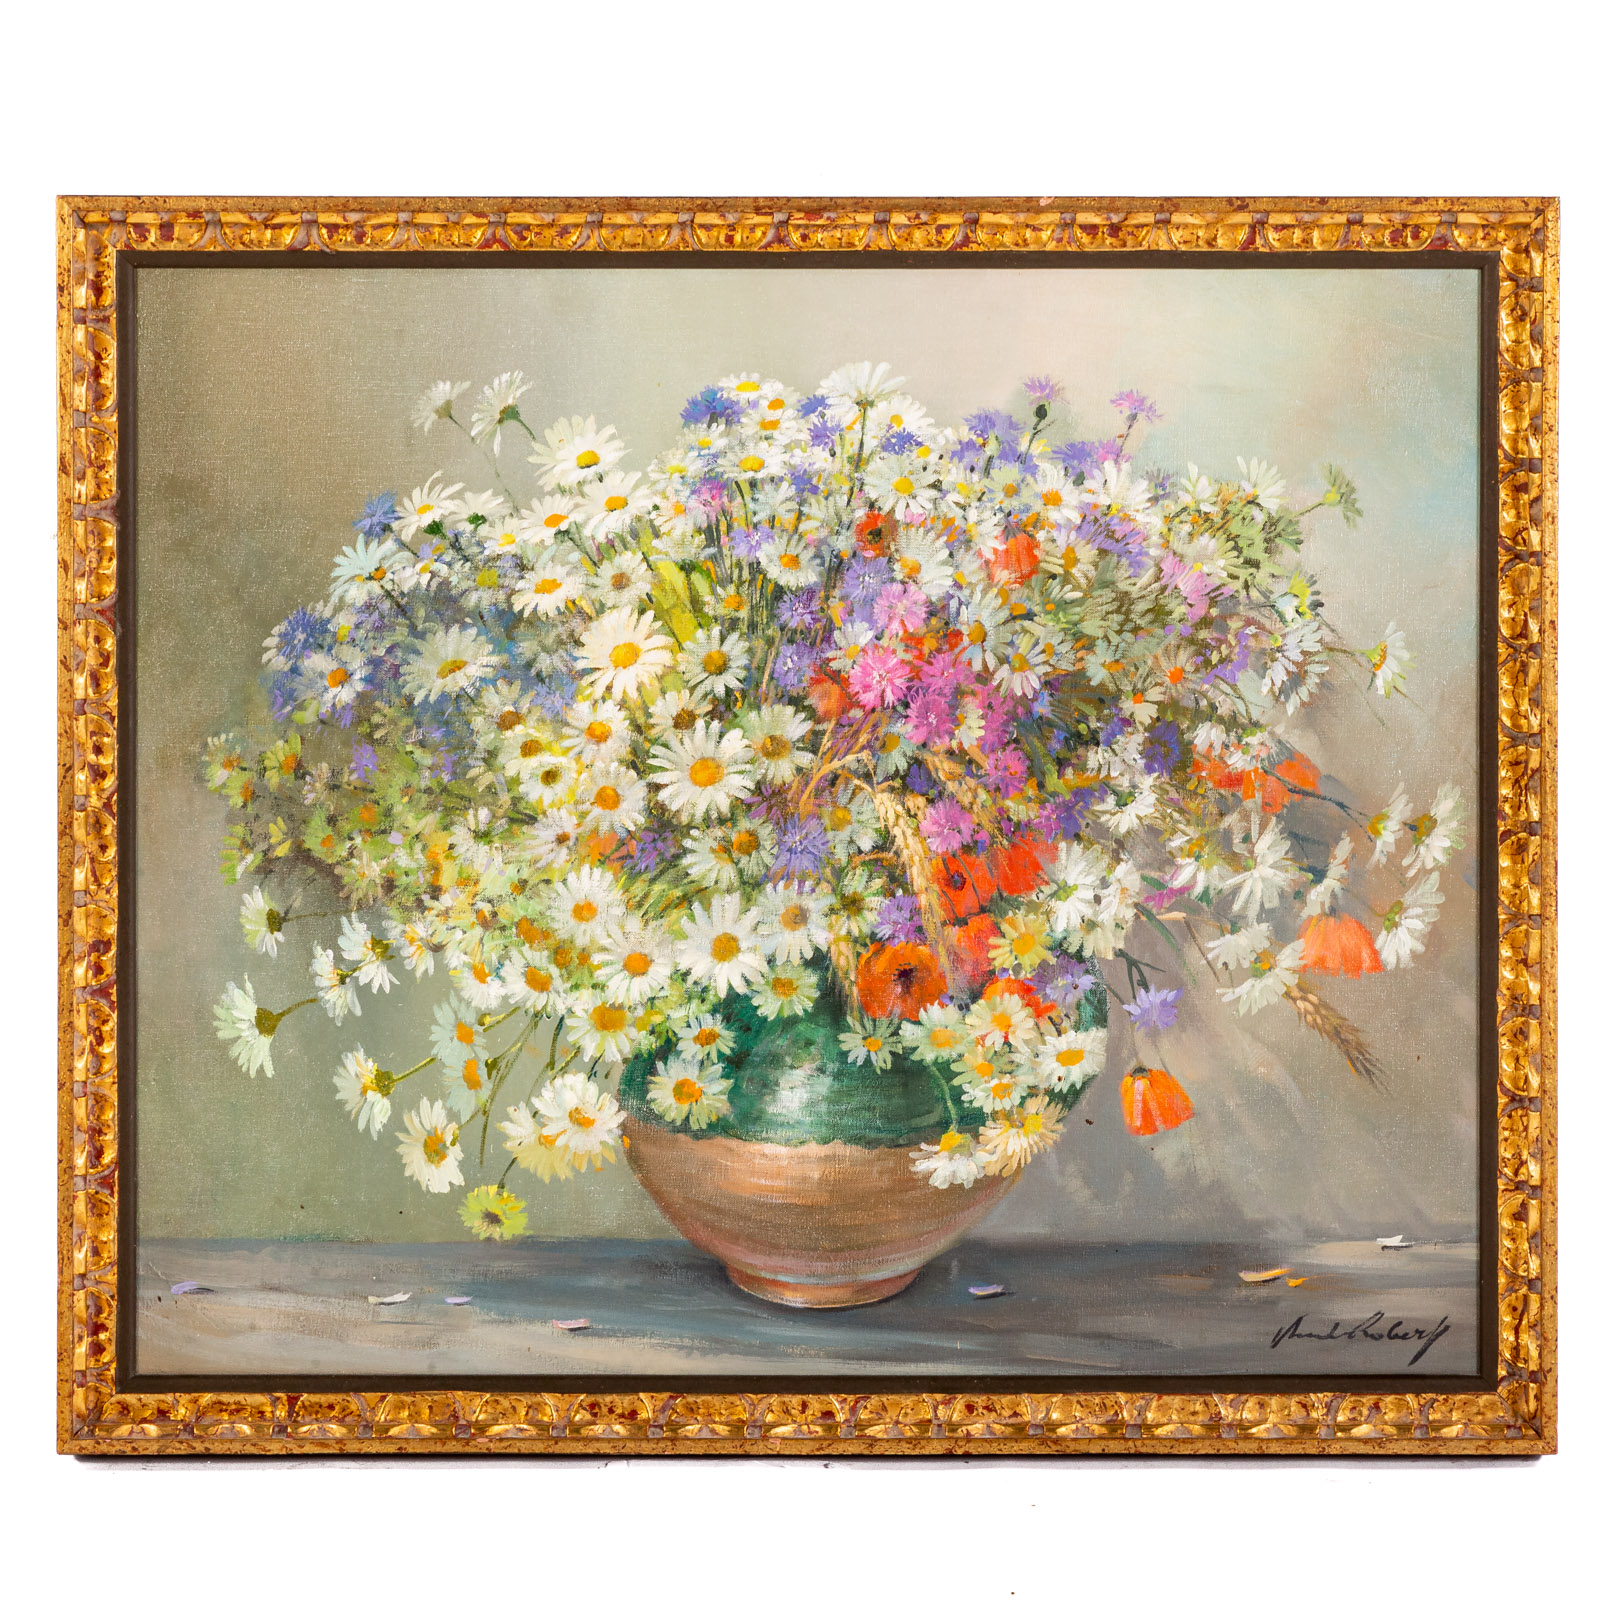 20TH CENTURY. STILL LIFE WITH DAISIES,